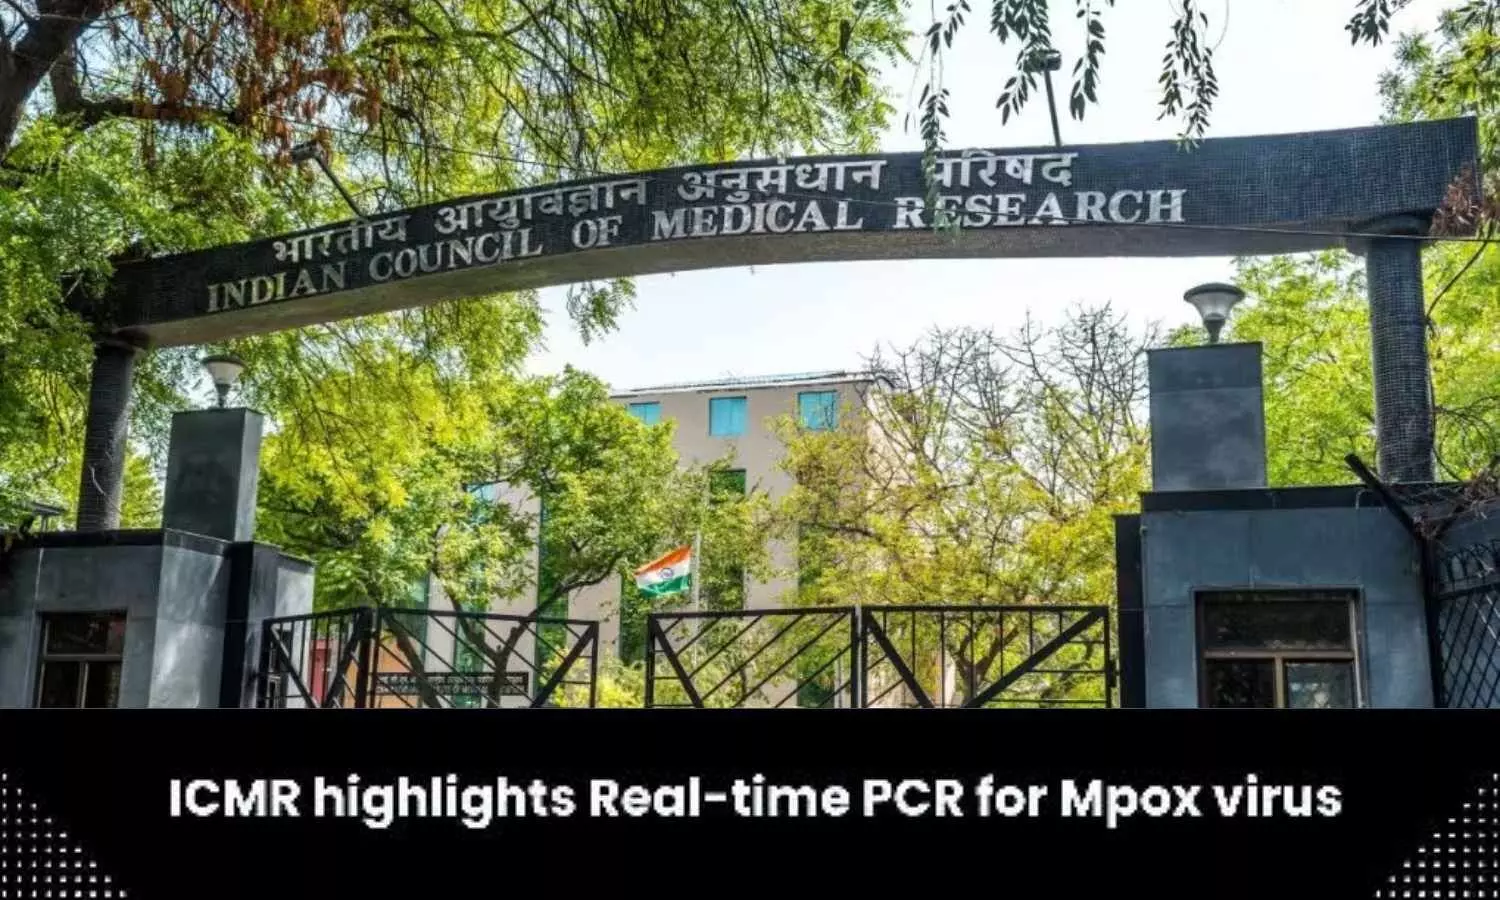 Real-time PCR for Mpox virus highlighted by ICMR